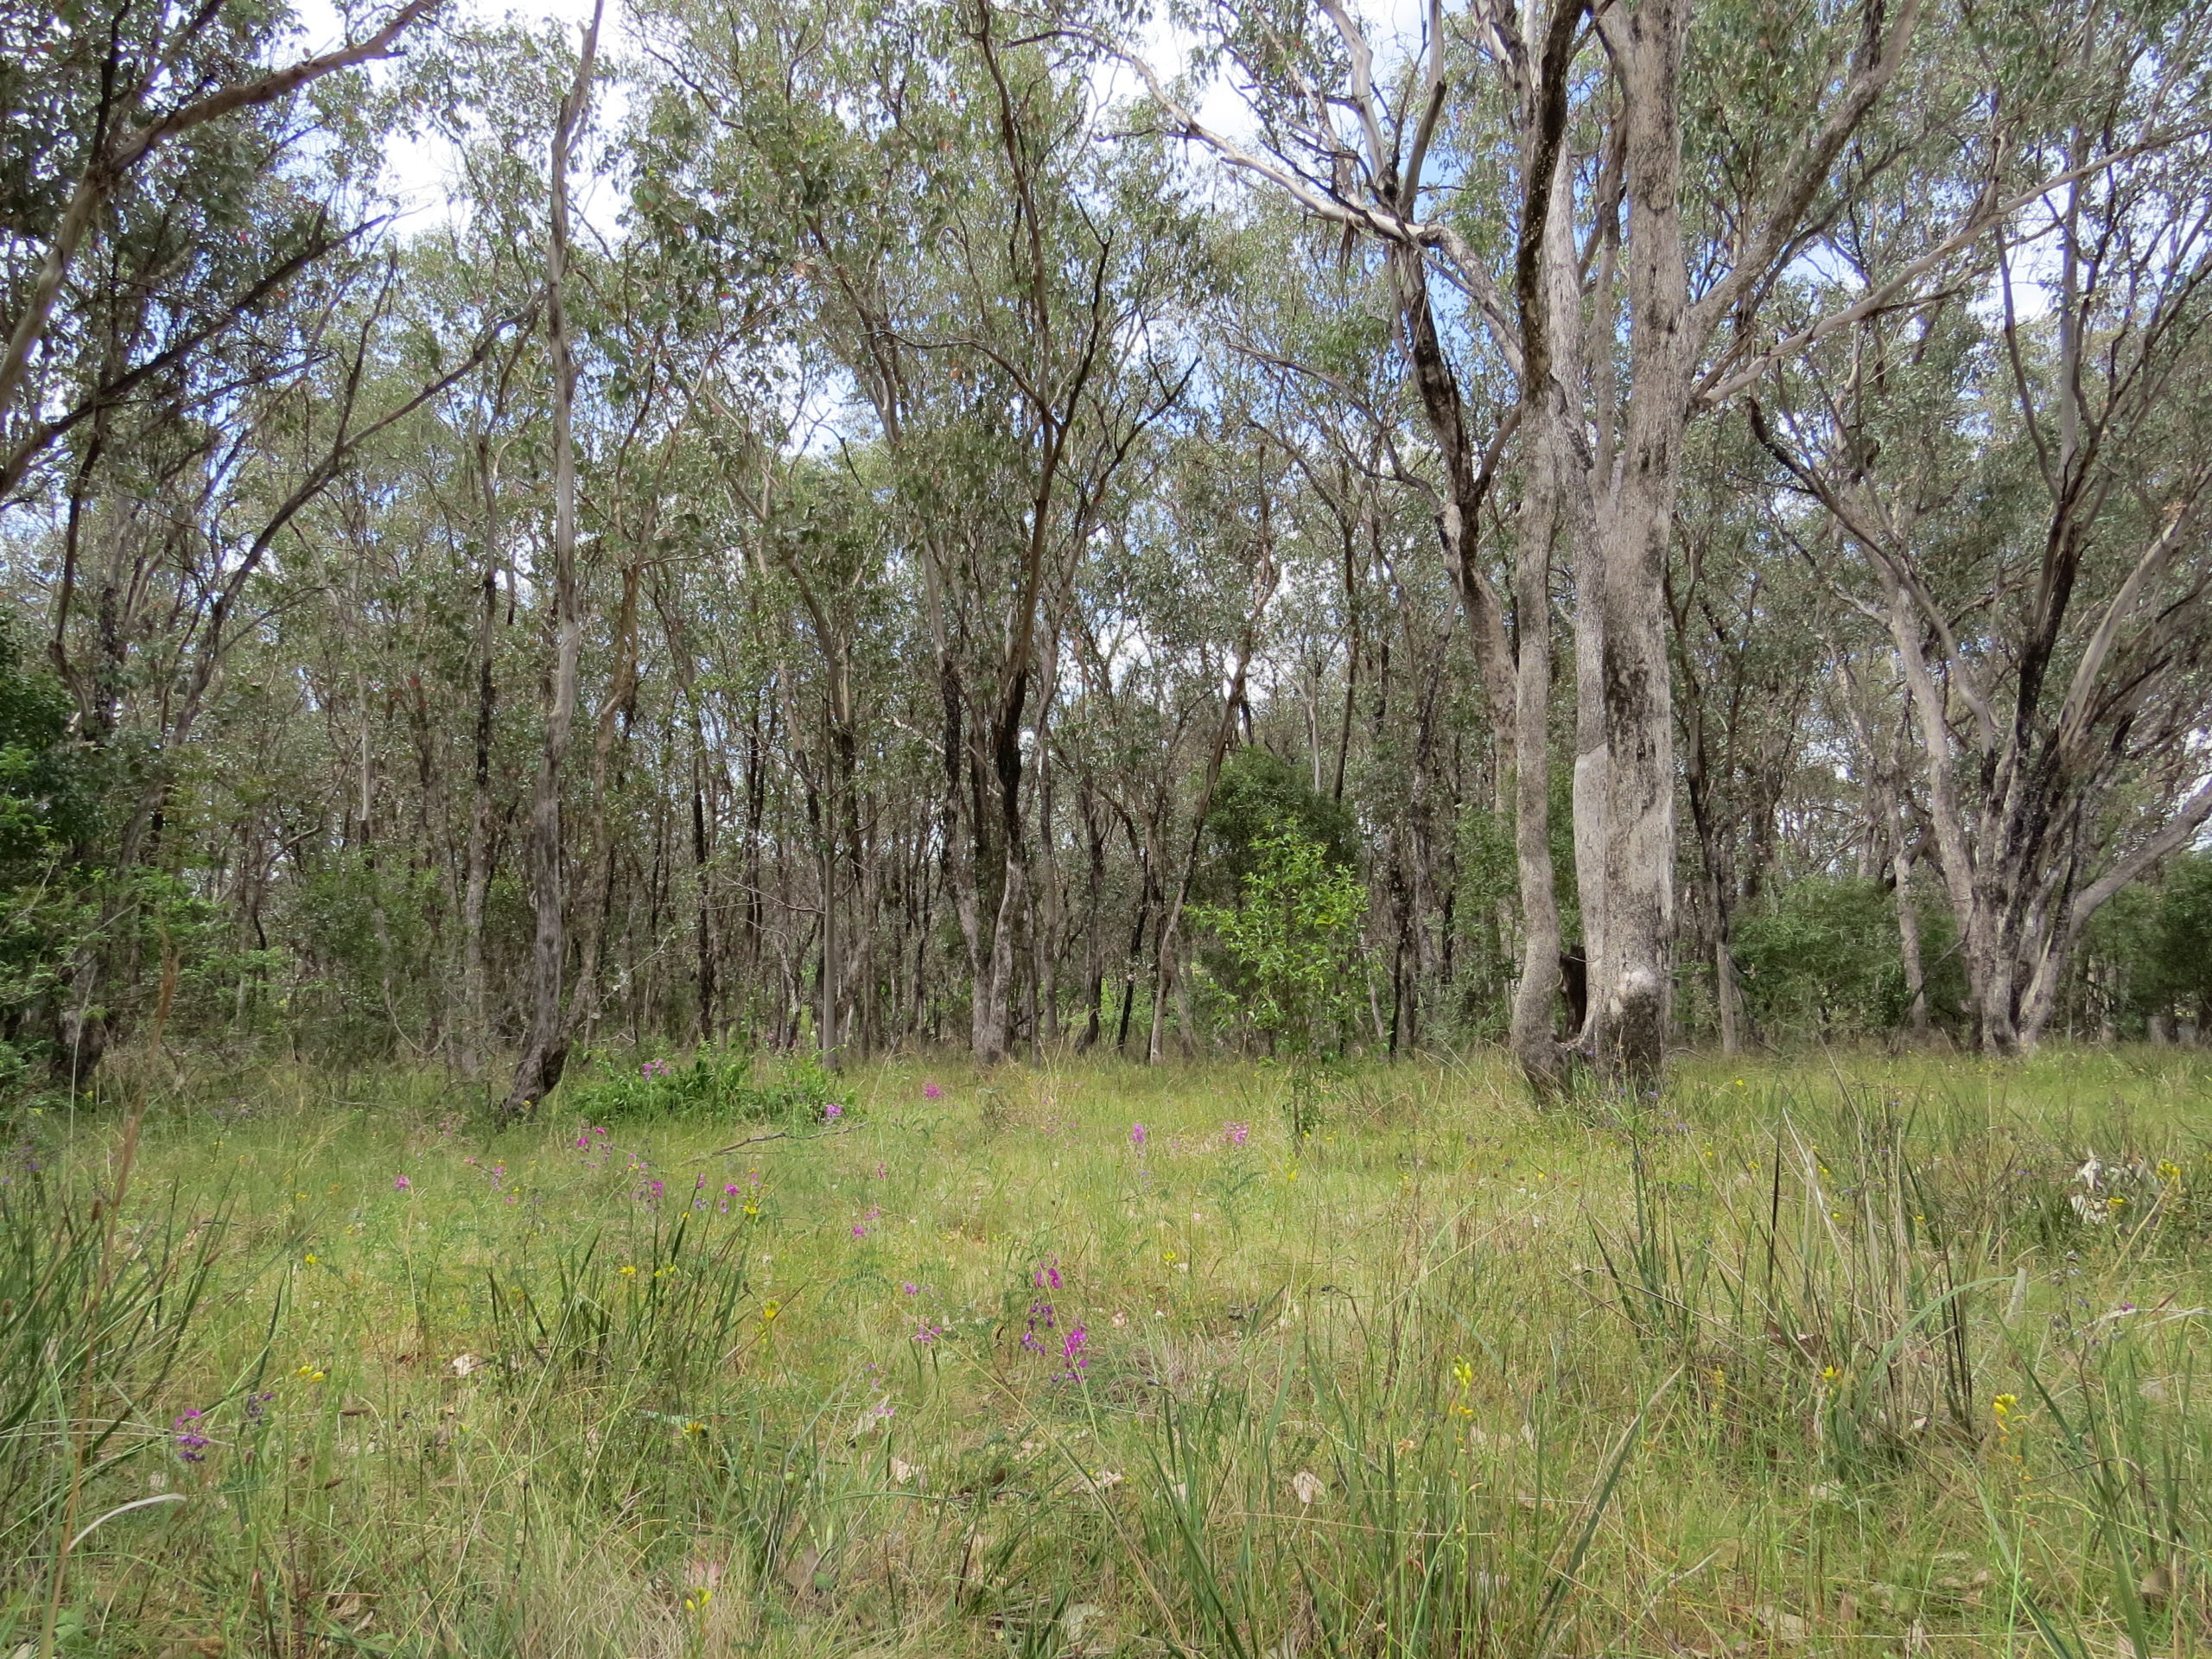 Lost landscapes. An image of Eucalyptus albens grassy woodlands.